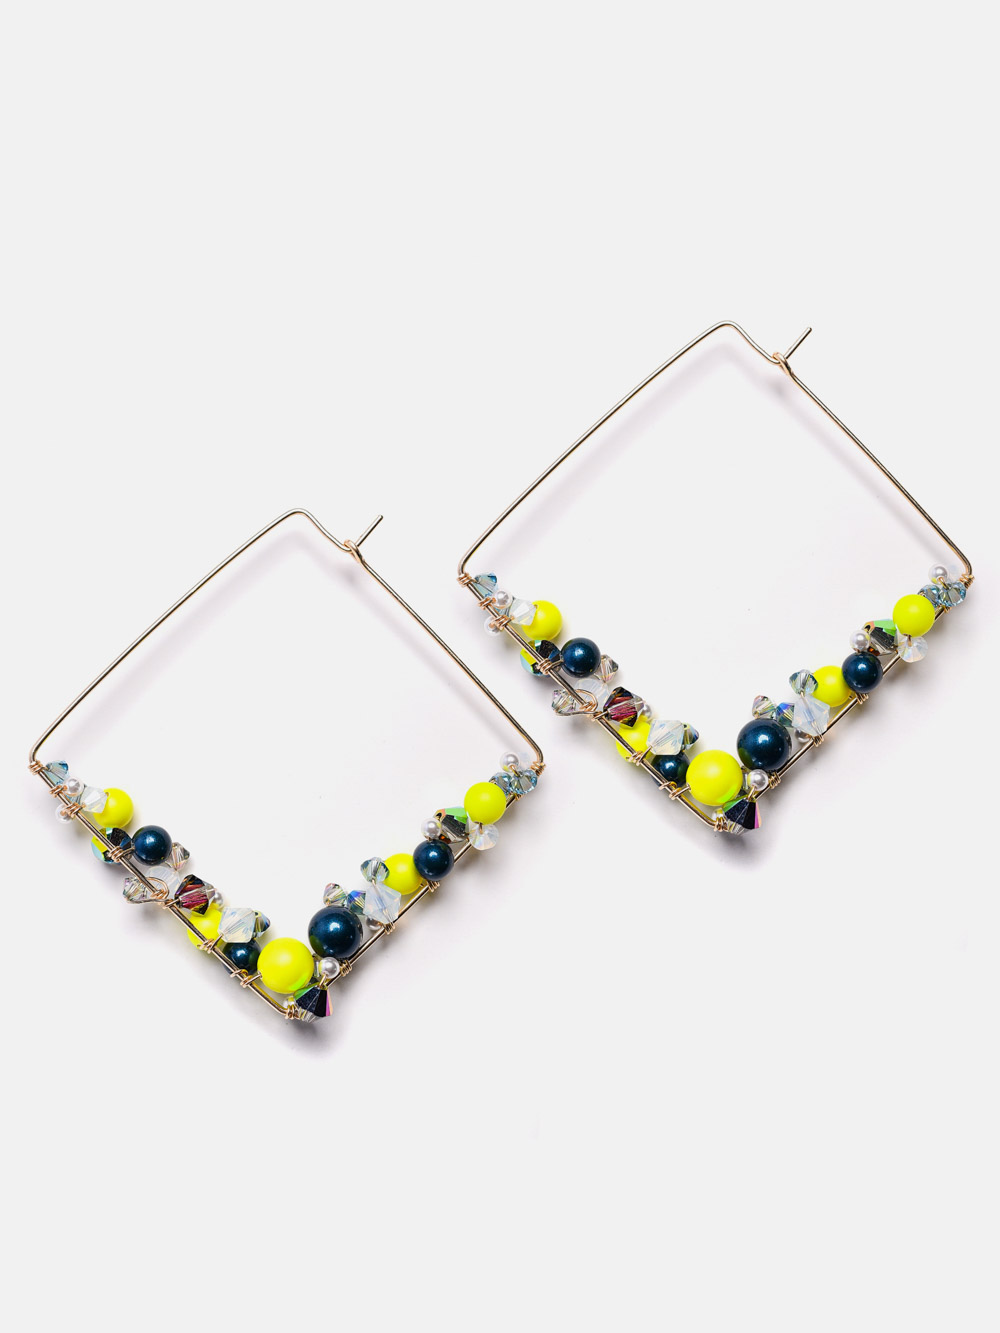 14k gold filled earrings with neon yellow pearls and colorful crystals